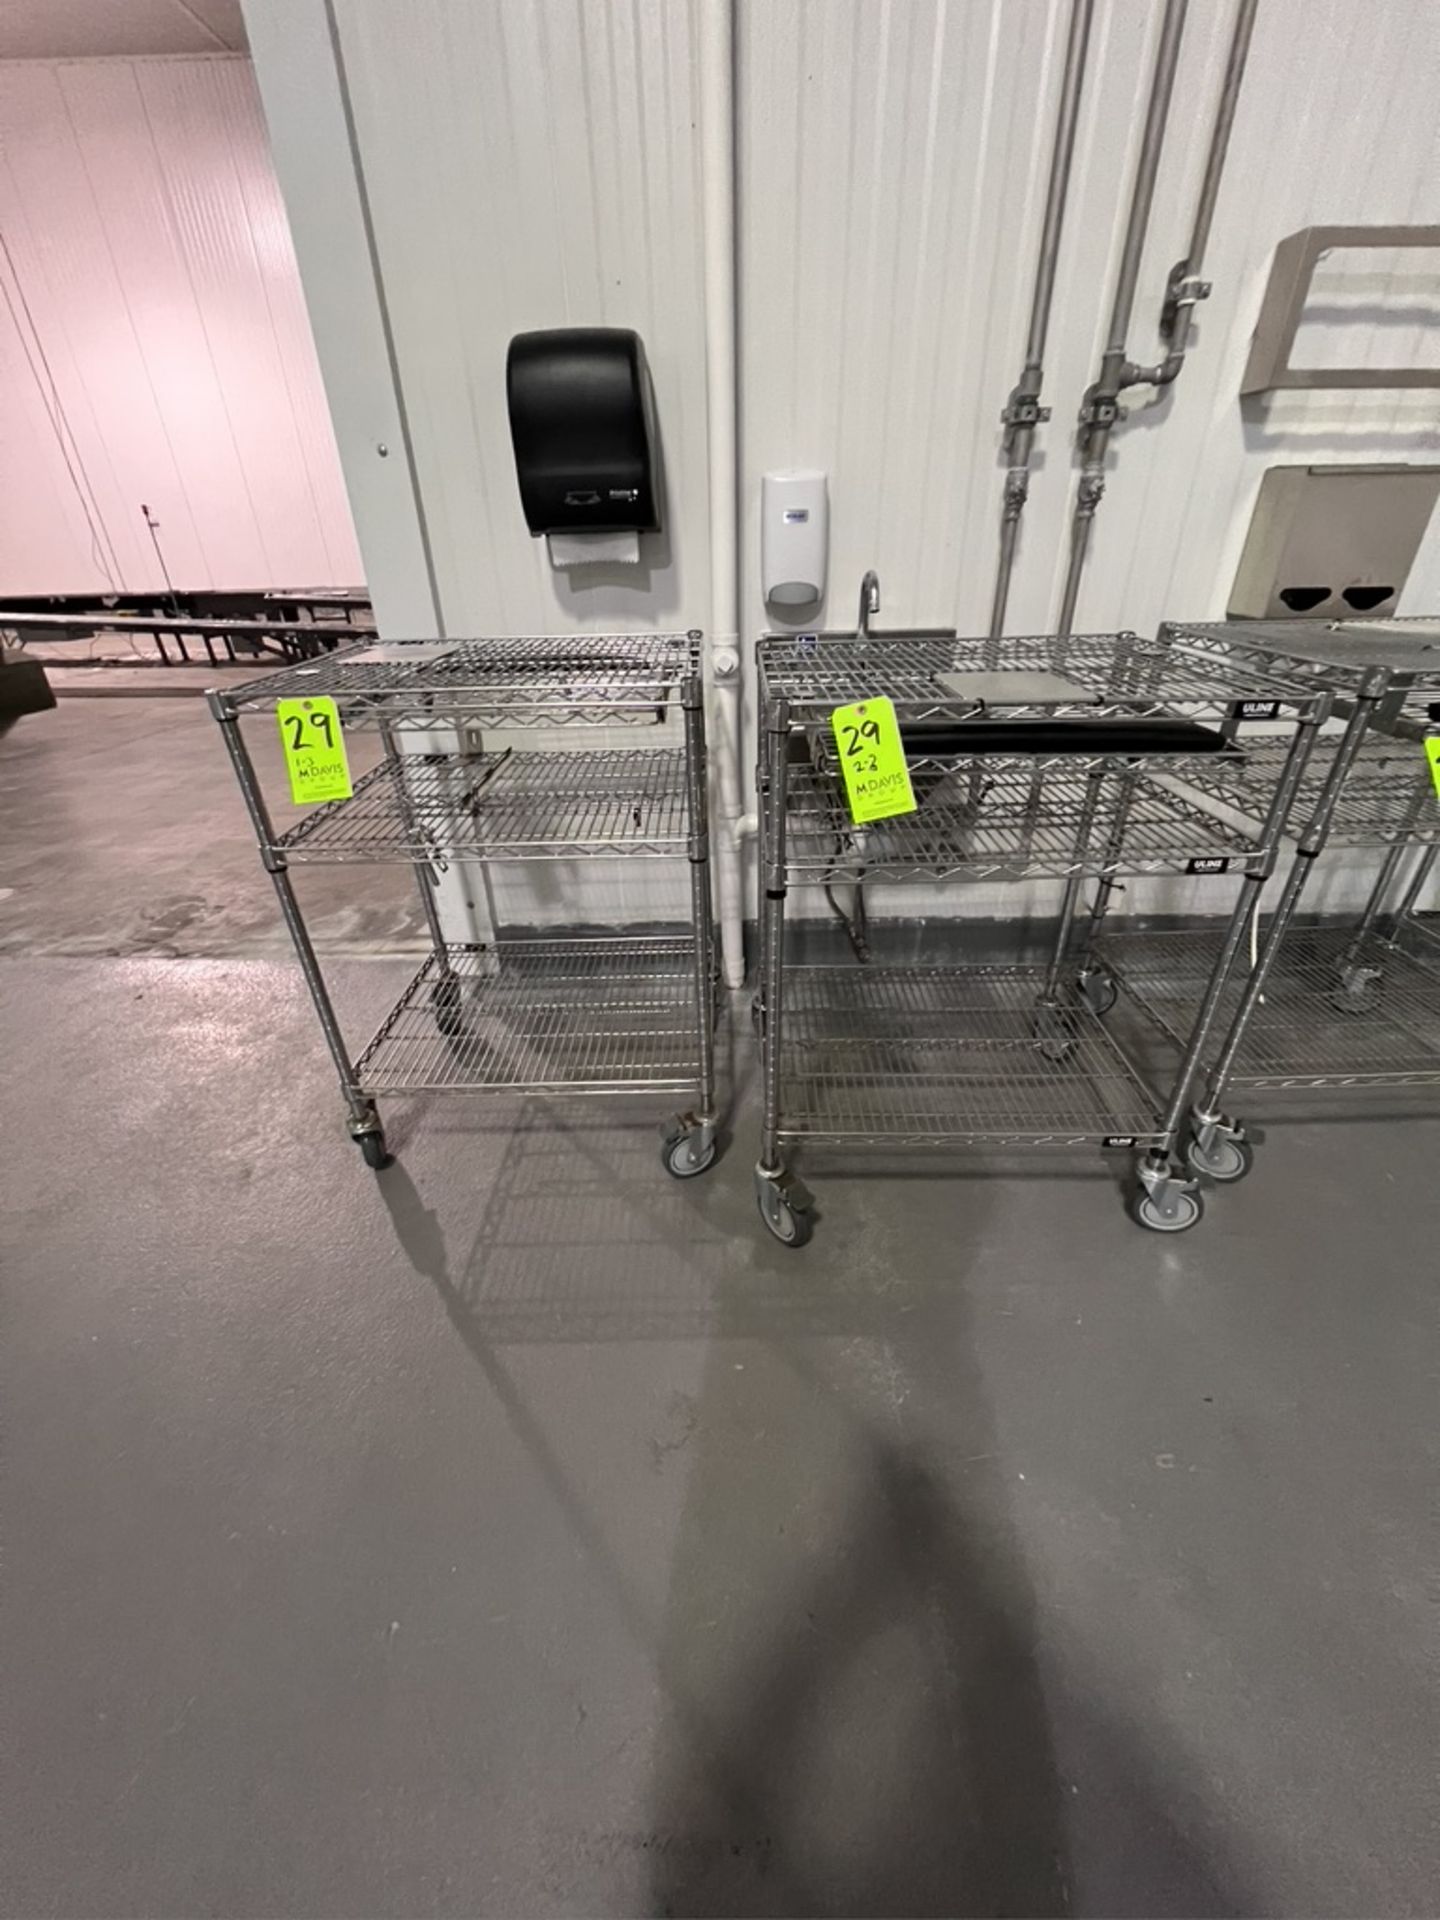 (3) ULINE WIRE RACK COMPUTER PUSH CARTS (RIGGING & SIMPLE LOADING FEE $25.00) (NOTE: DOES NOT